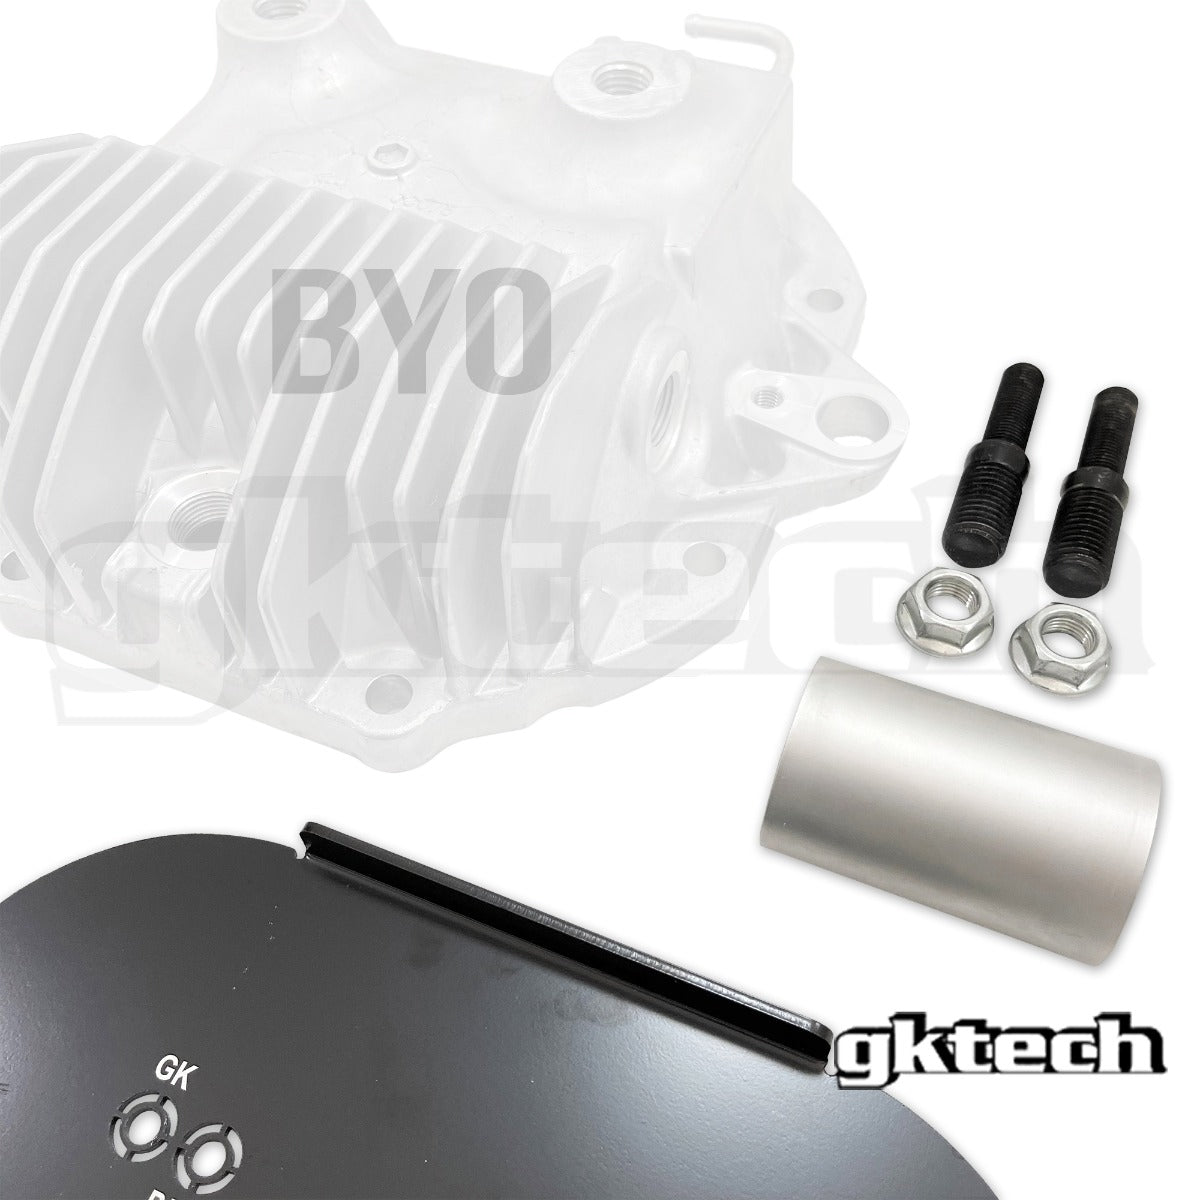 Pathfinder diff cover to Z33/Z34 subframe conversion bushings